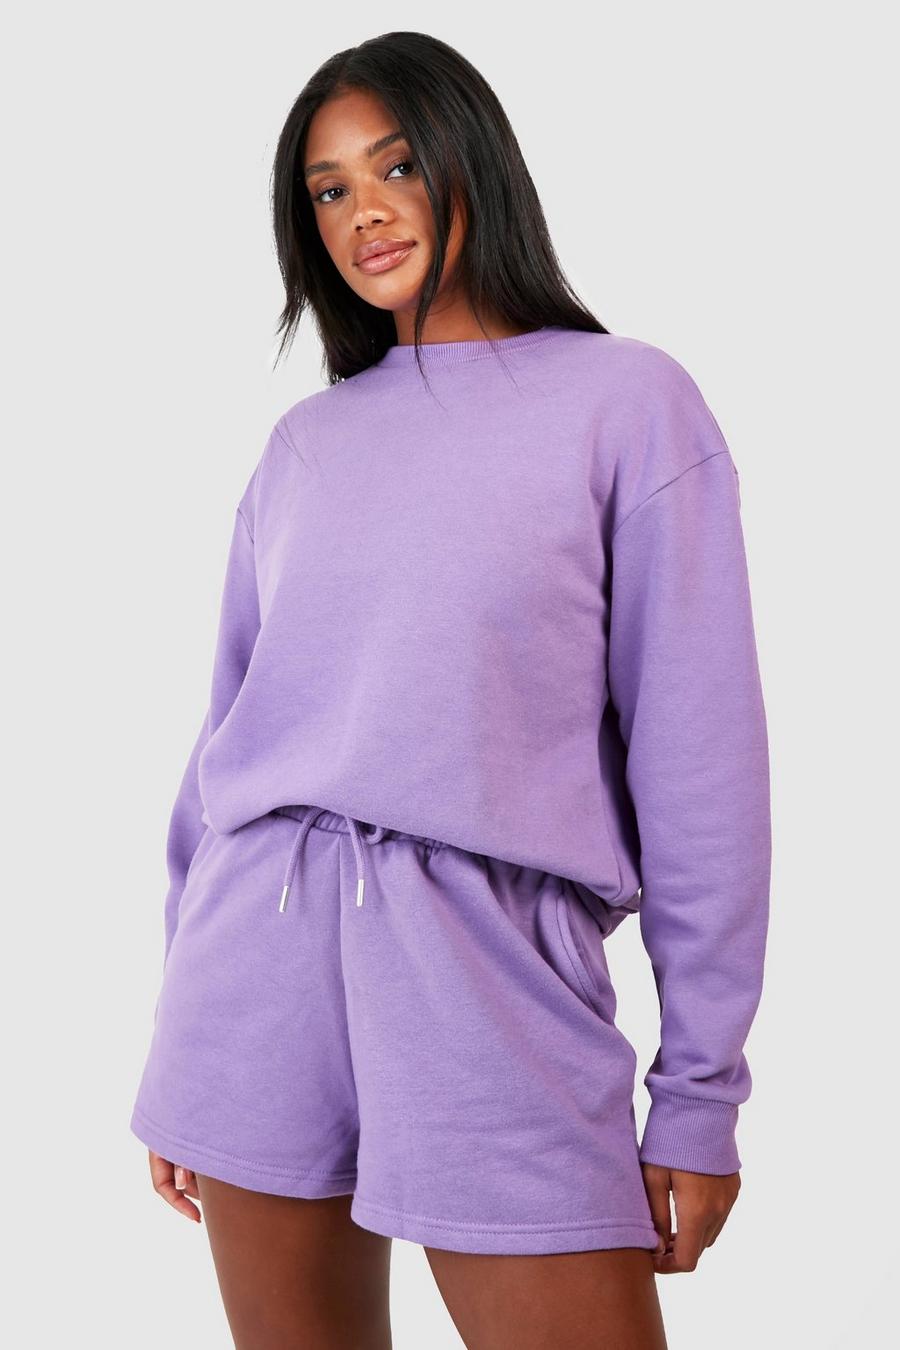 Purple Sweater Short Tracksuit with REEL cotton